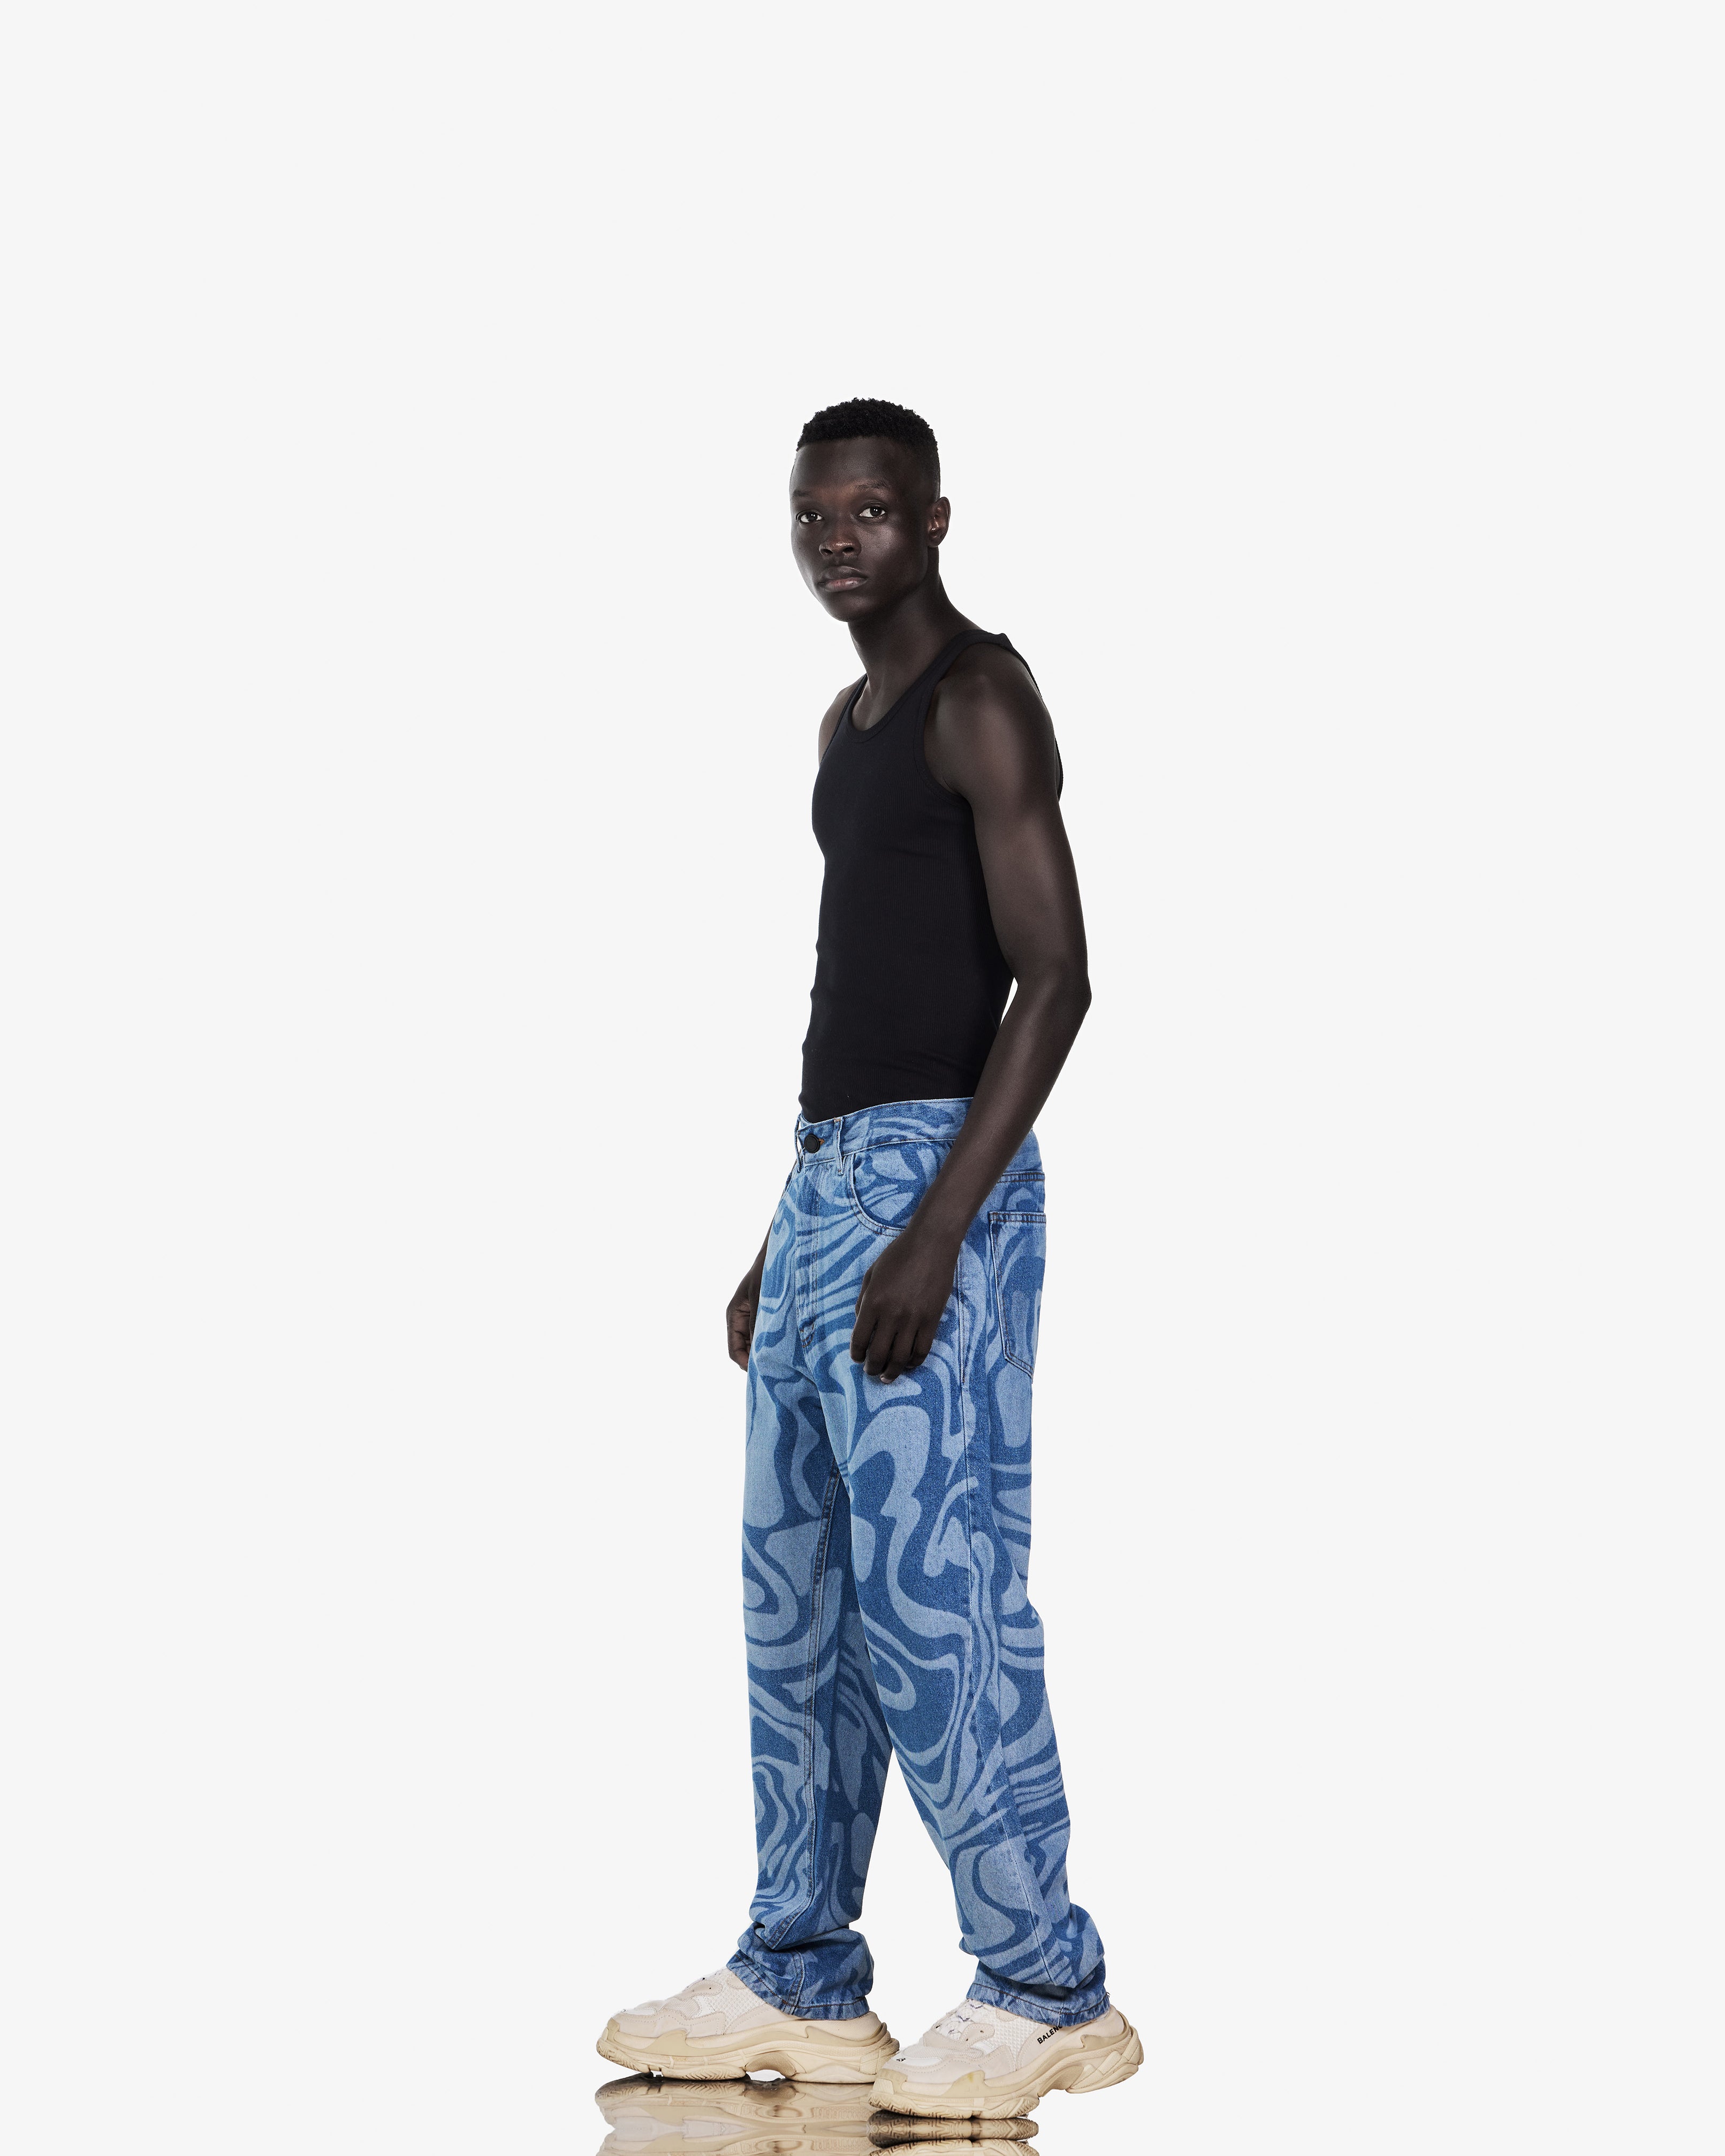 Lost Printed Baggy Fit Jeans